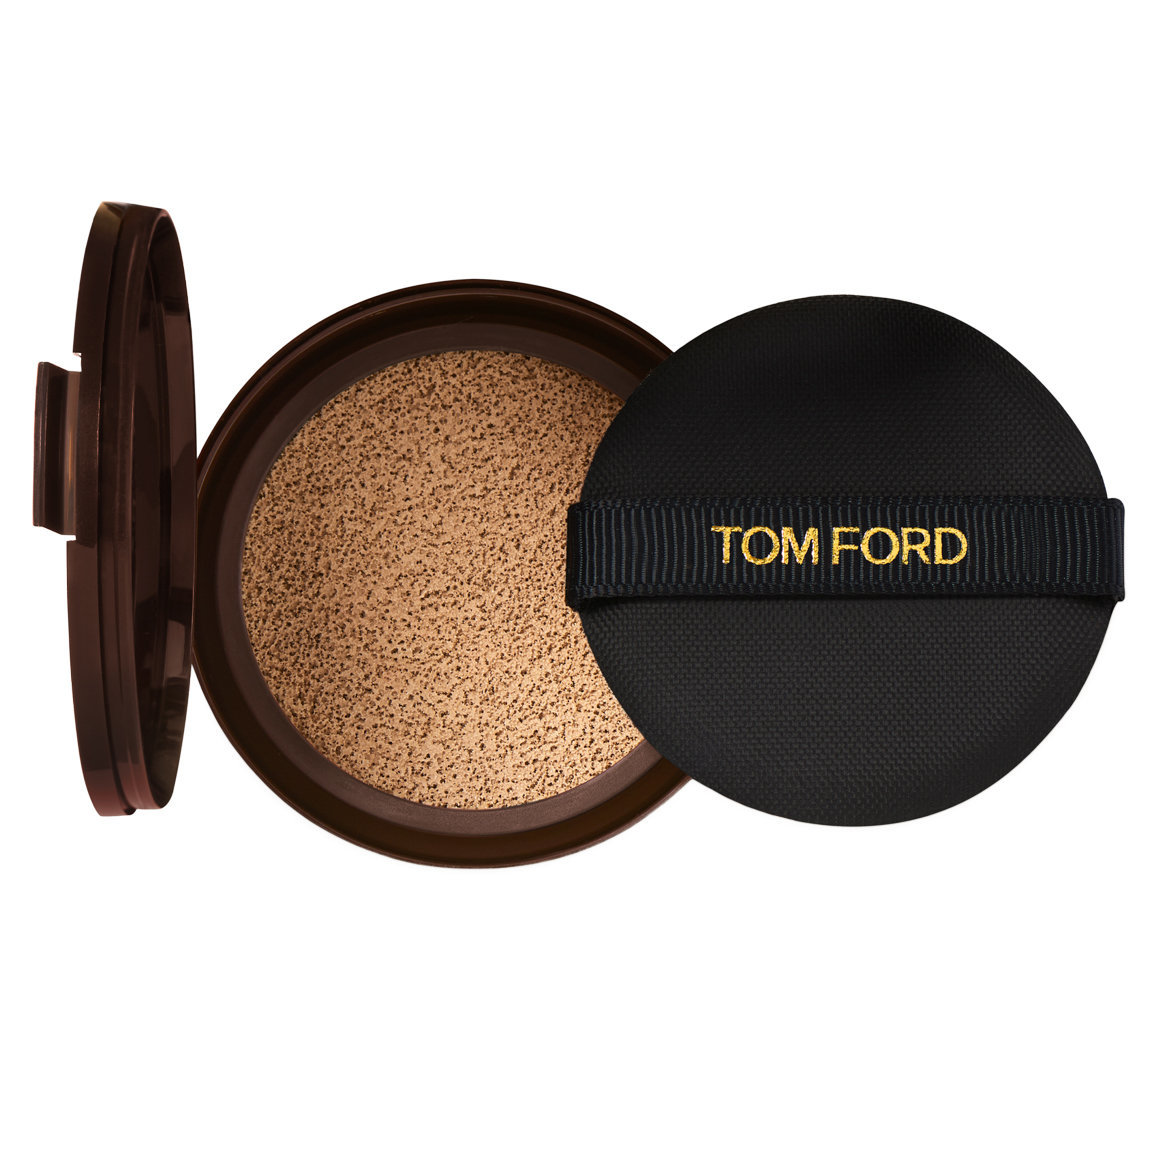 TOM FORD Shade and Illuminate Soft Radiance Foundation Cushion Compact Refill 6.5 Sable alternative view 1.